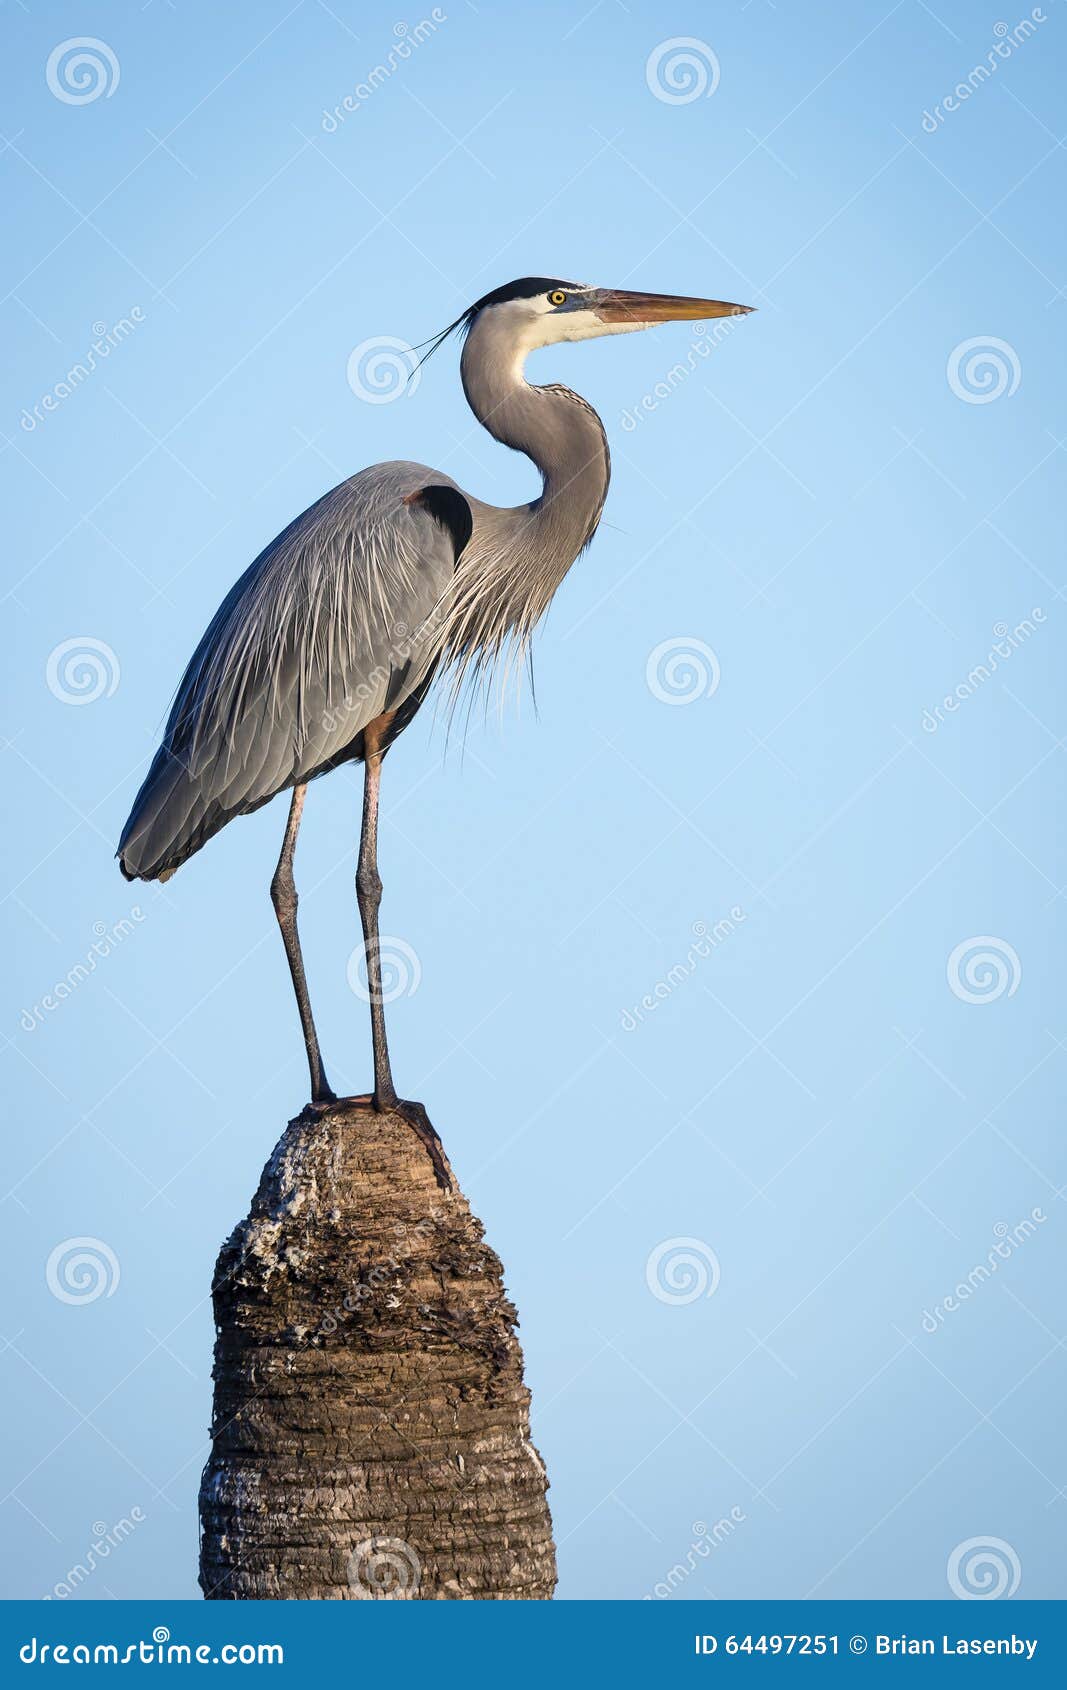 great blue heron (ardea herodias) perched on top of a palm tree